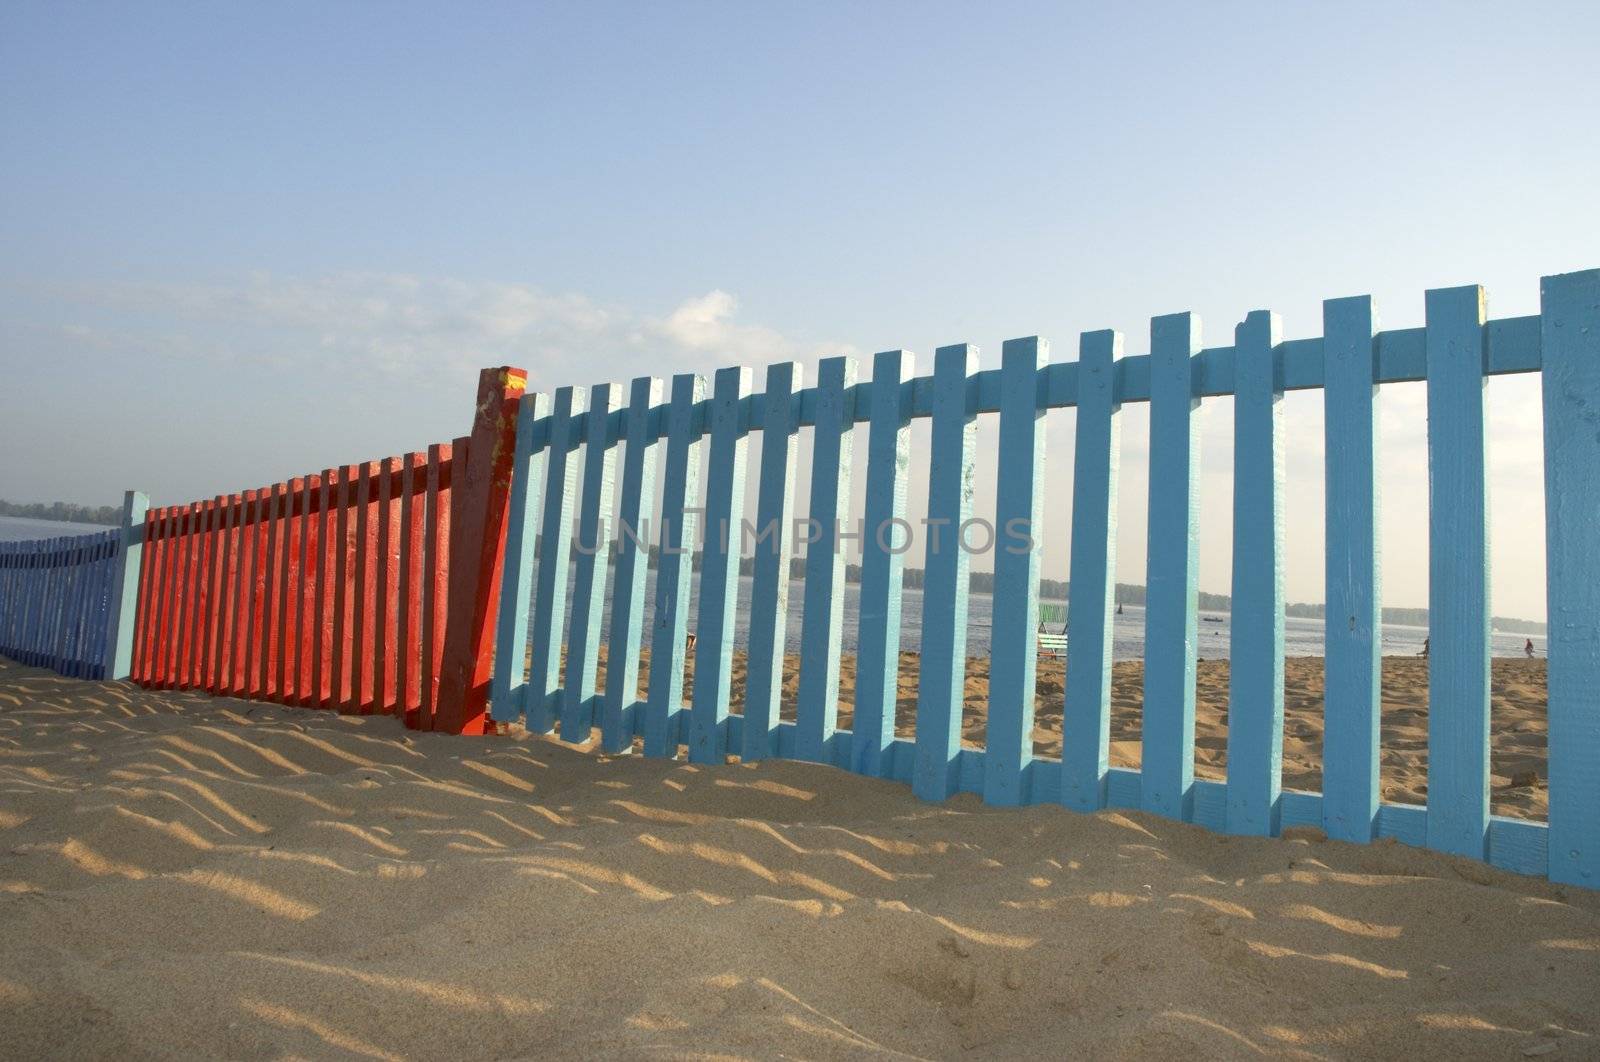 the blue and red fence